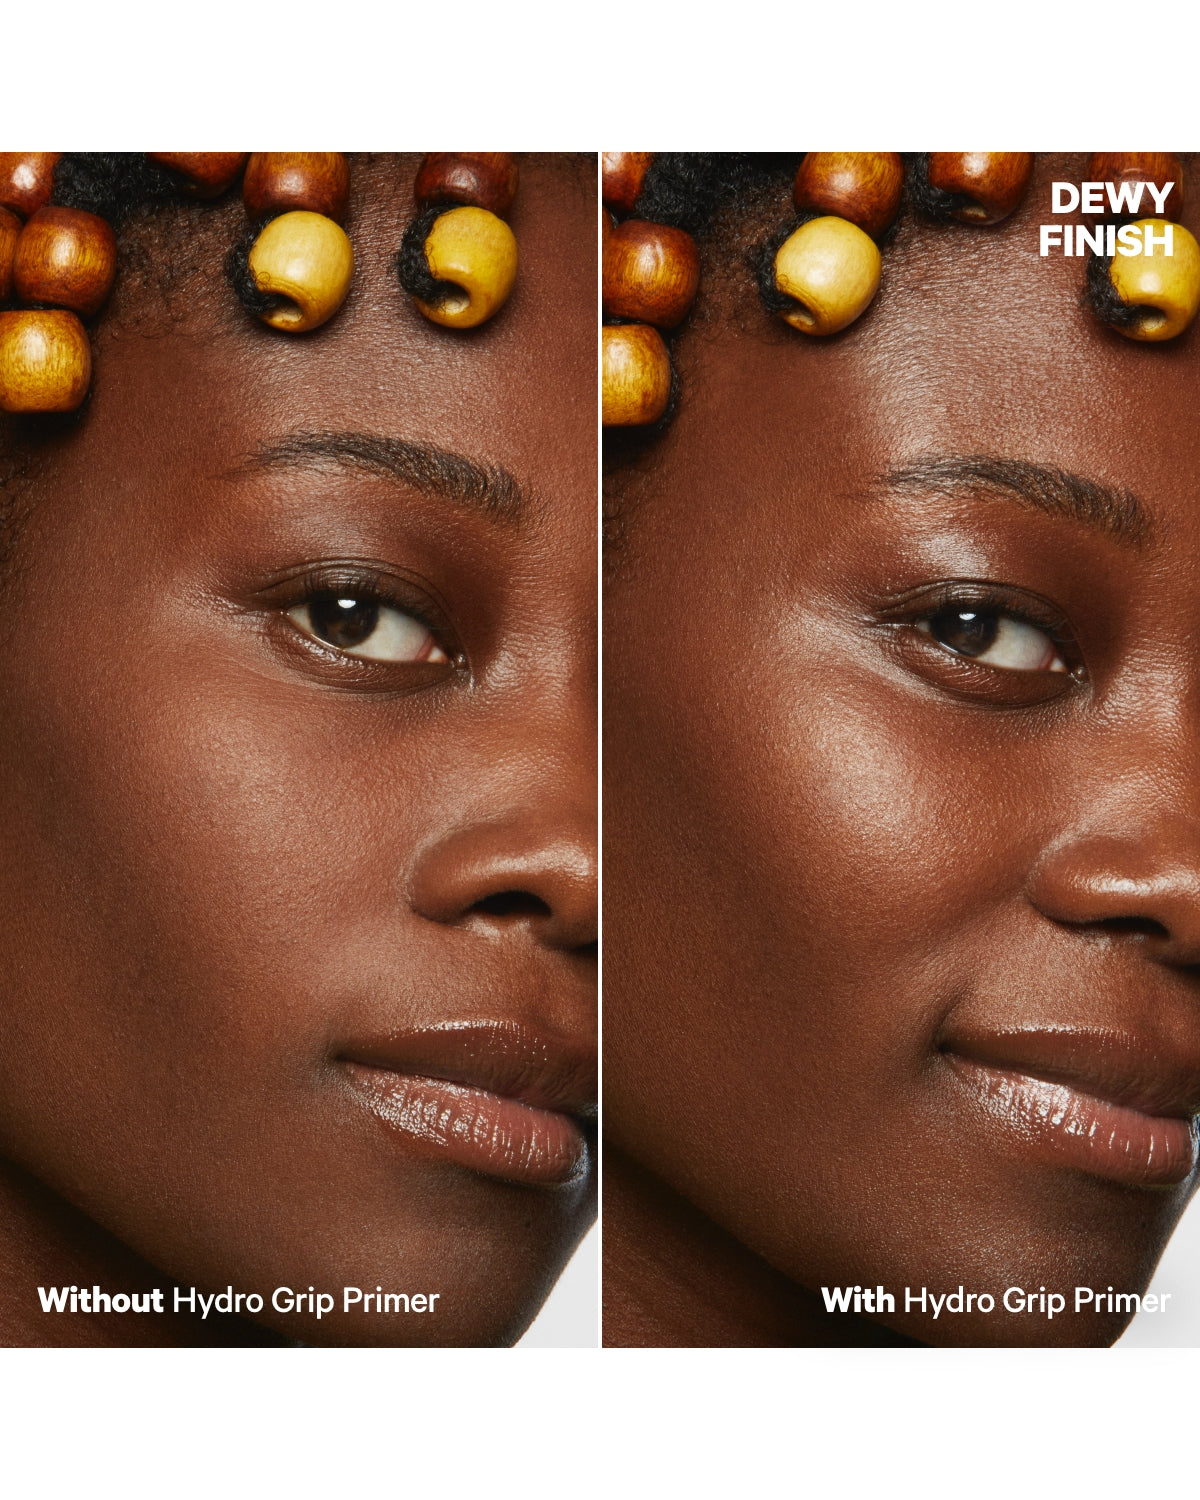 Hydro Grip Primer Before and After | Milk Makeup